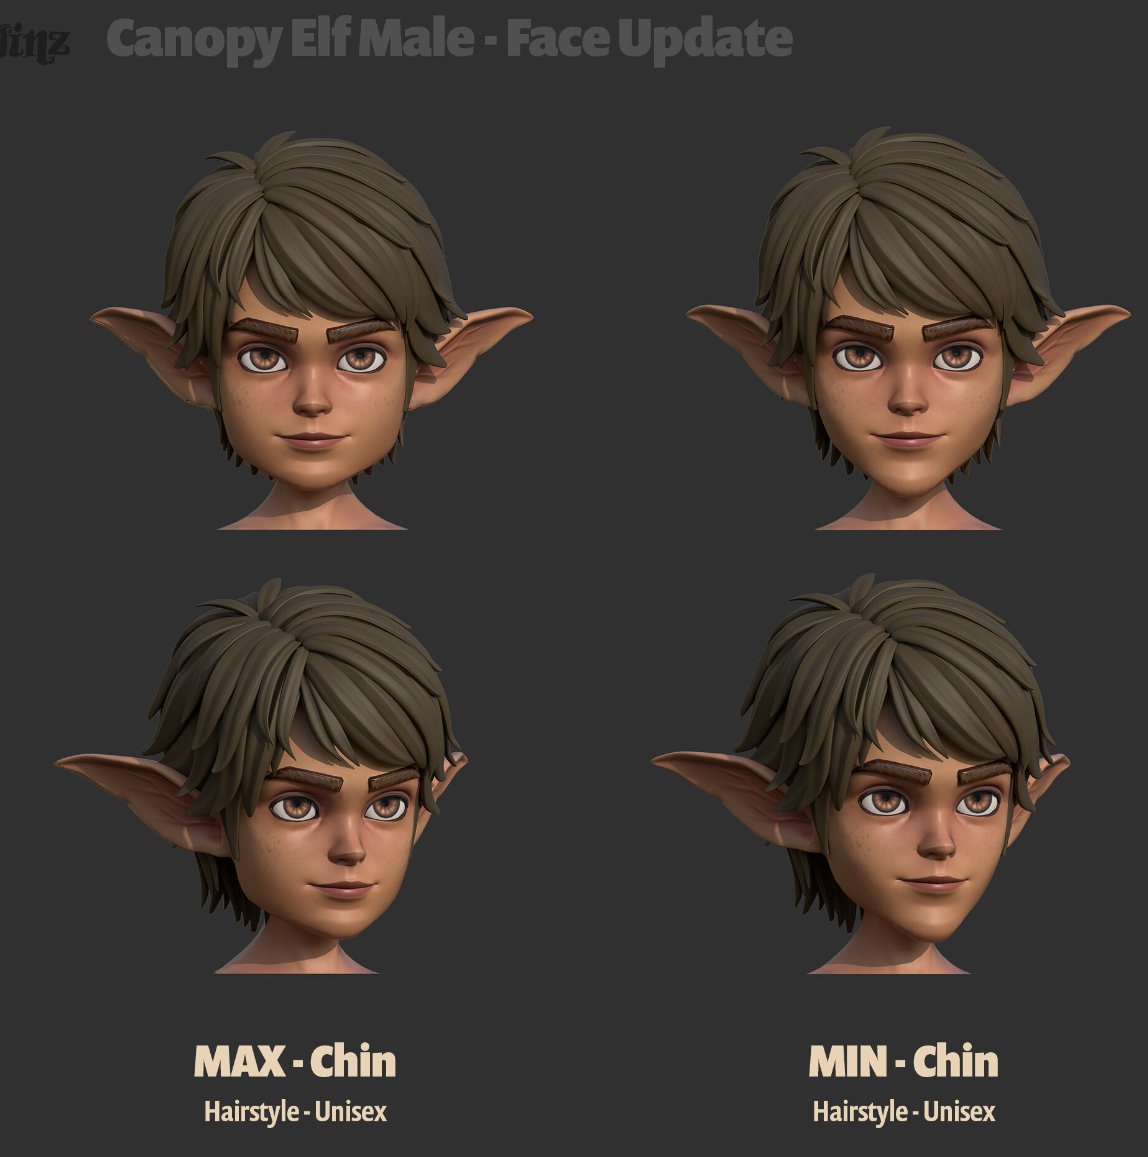 The past week we have been working on updating some of our models including the male elf and different Draggin stages...

#dragginz #blockchaingaming